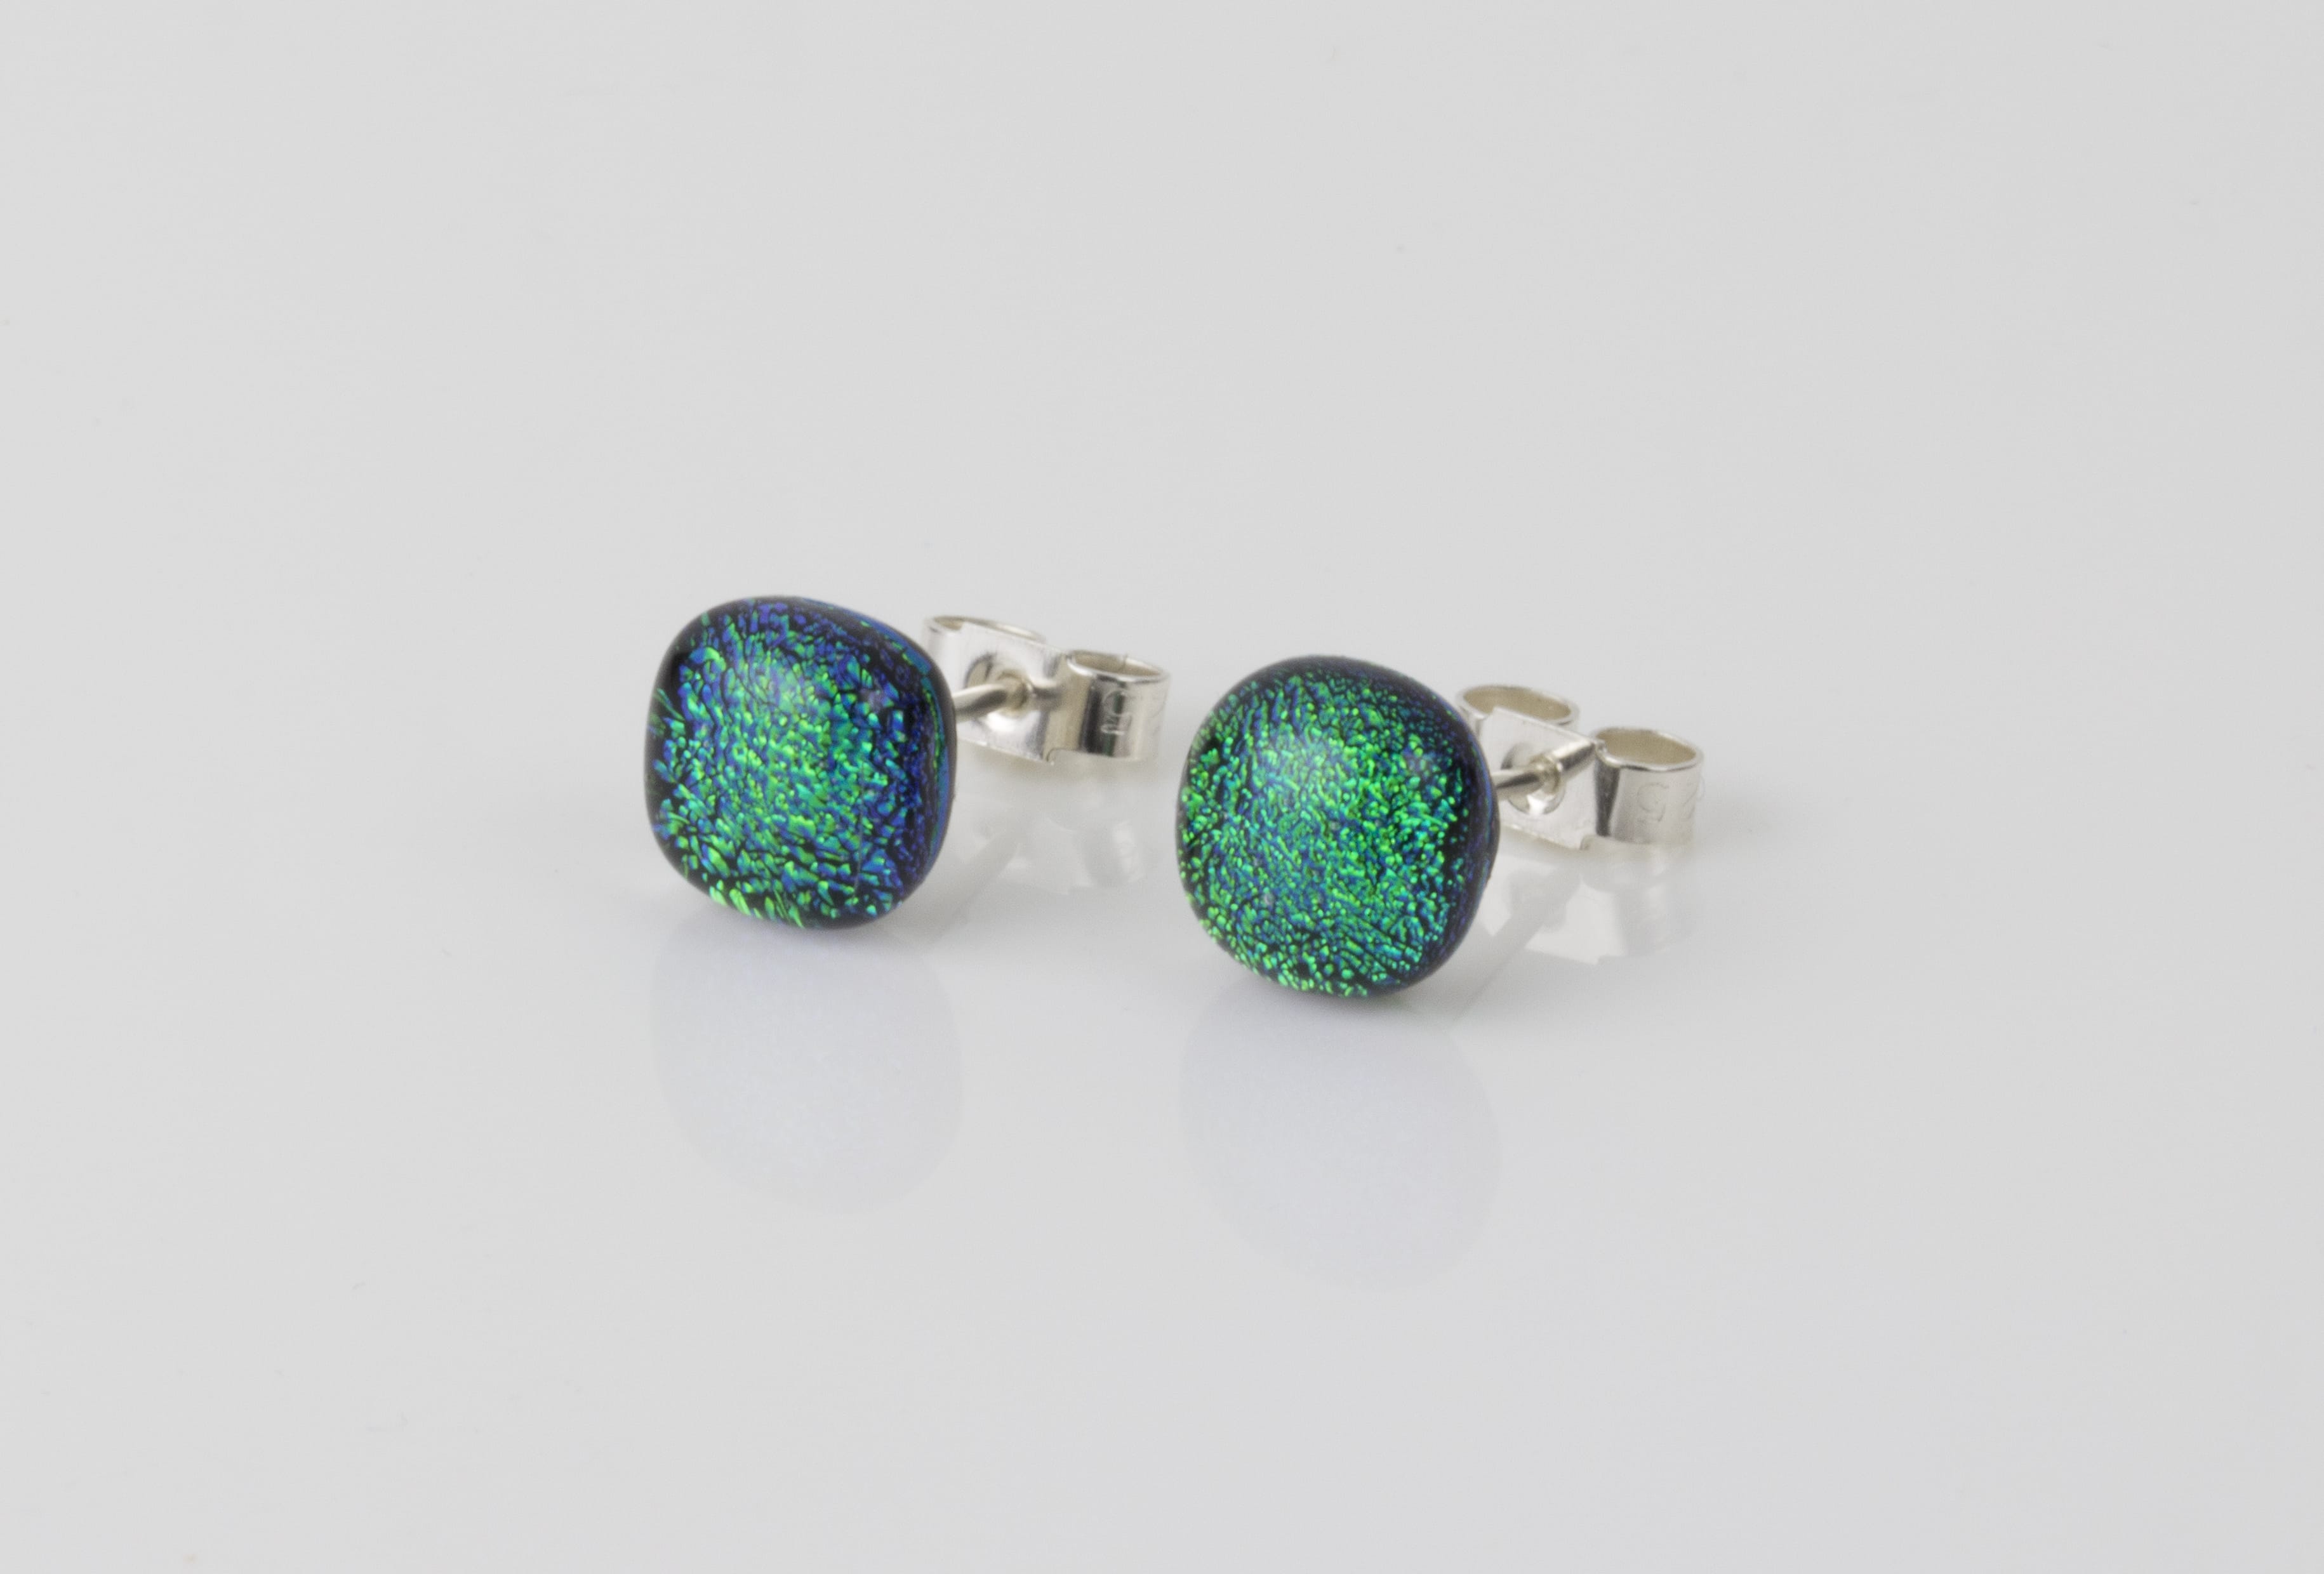 Dichroic glass jewellery uk, handmade stud earrings with emerald green dichroic glass, round, sterling glass 7-9mm, silver posts.